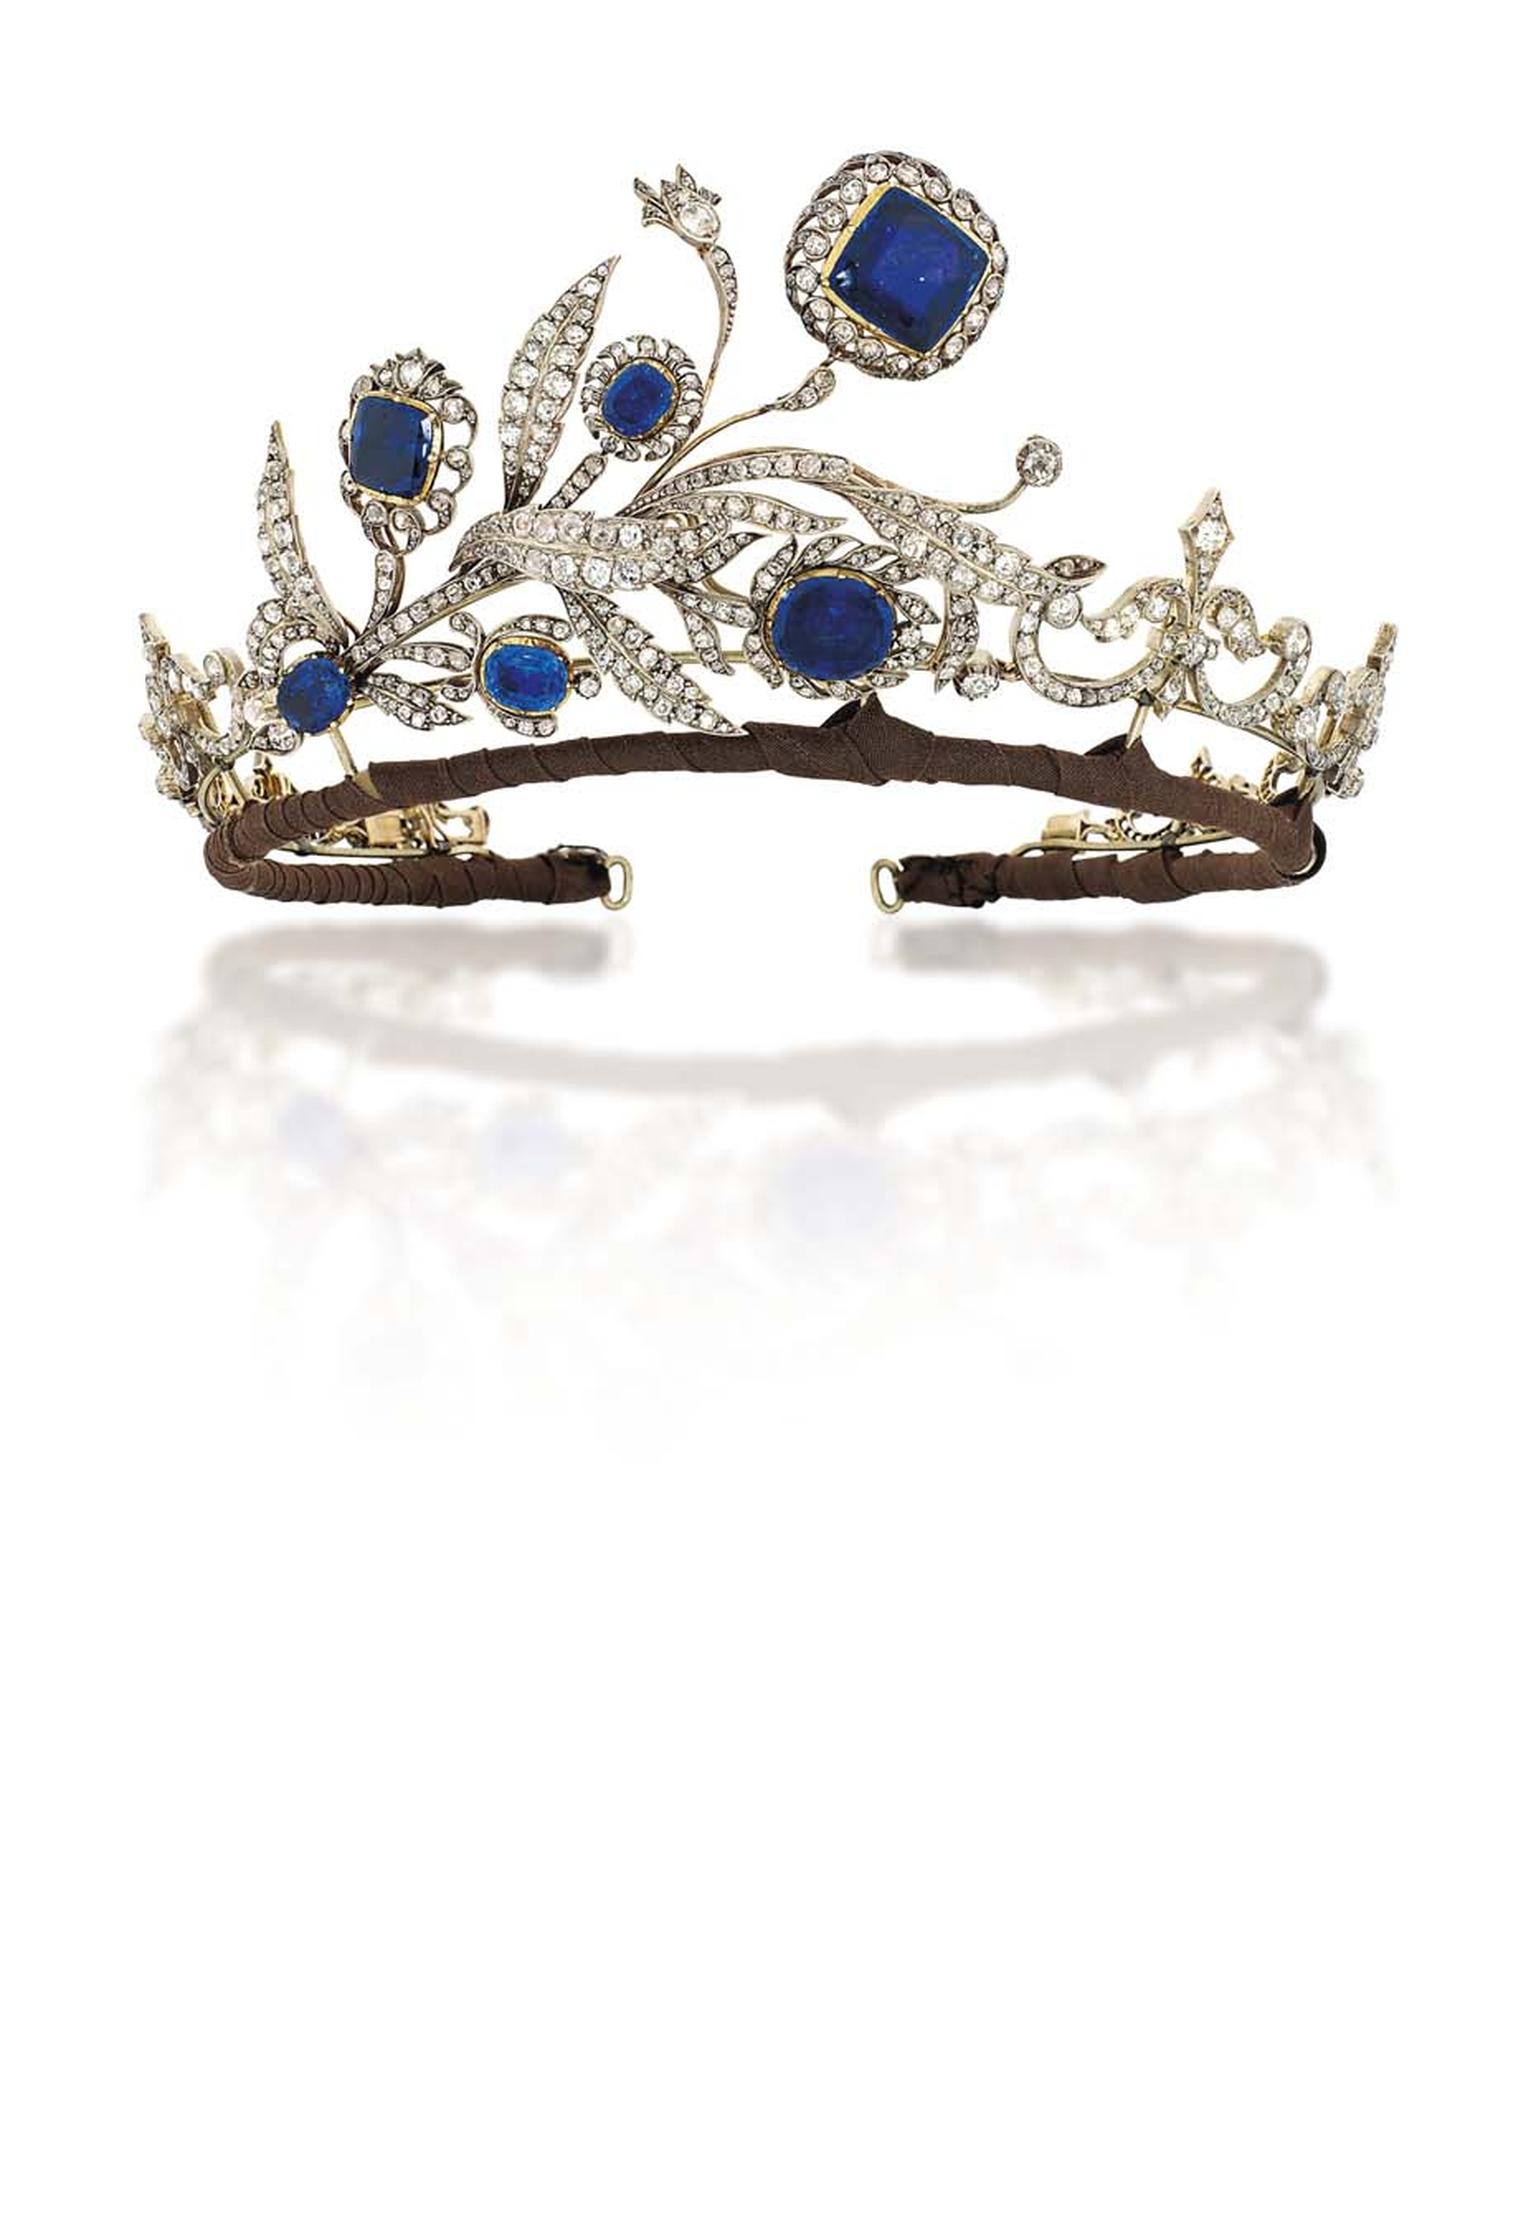 Lot 248, a sapphire and diamond tiara dating from 1890, is regal yet delicate (estimate: £30,000-40,000).